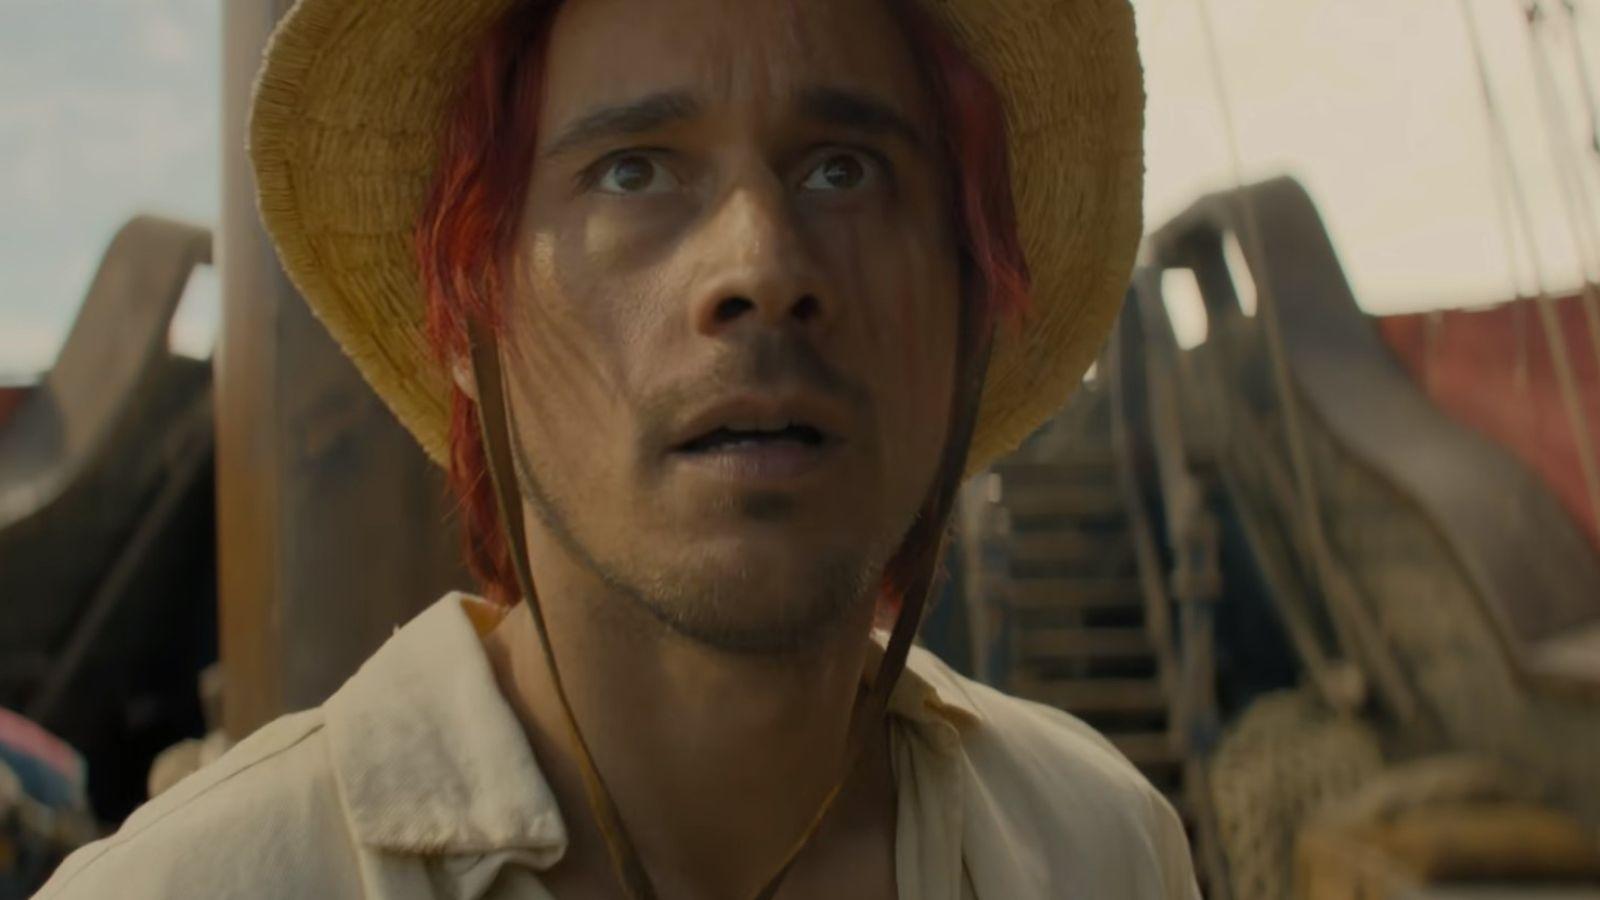 One Piece' Netflix Live-Action Series Casts Peter Gadiot as Shanks